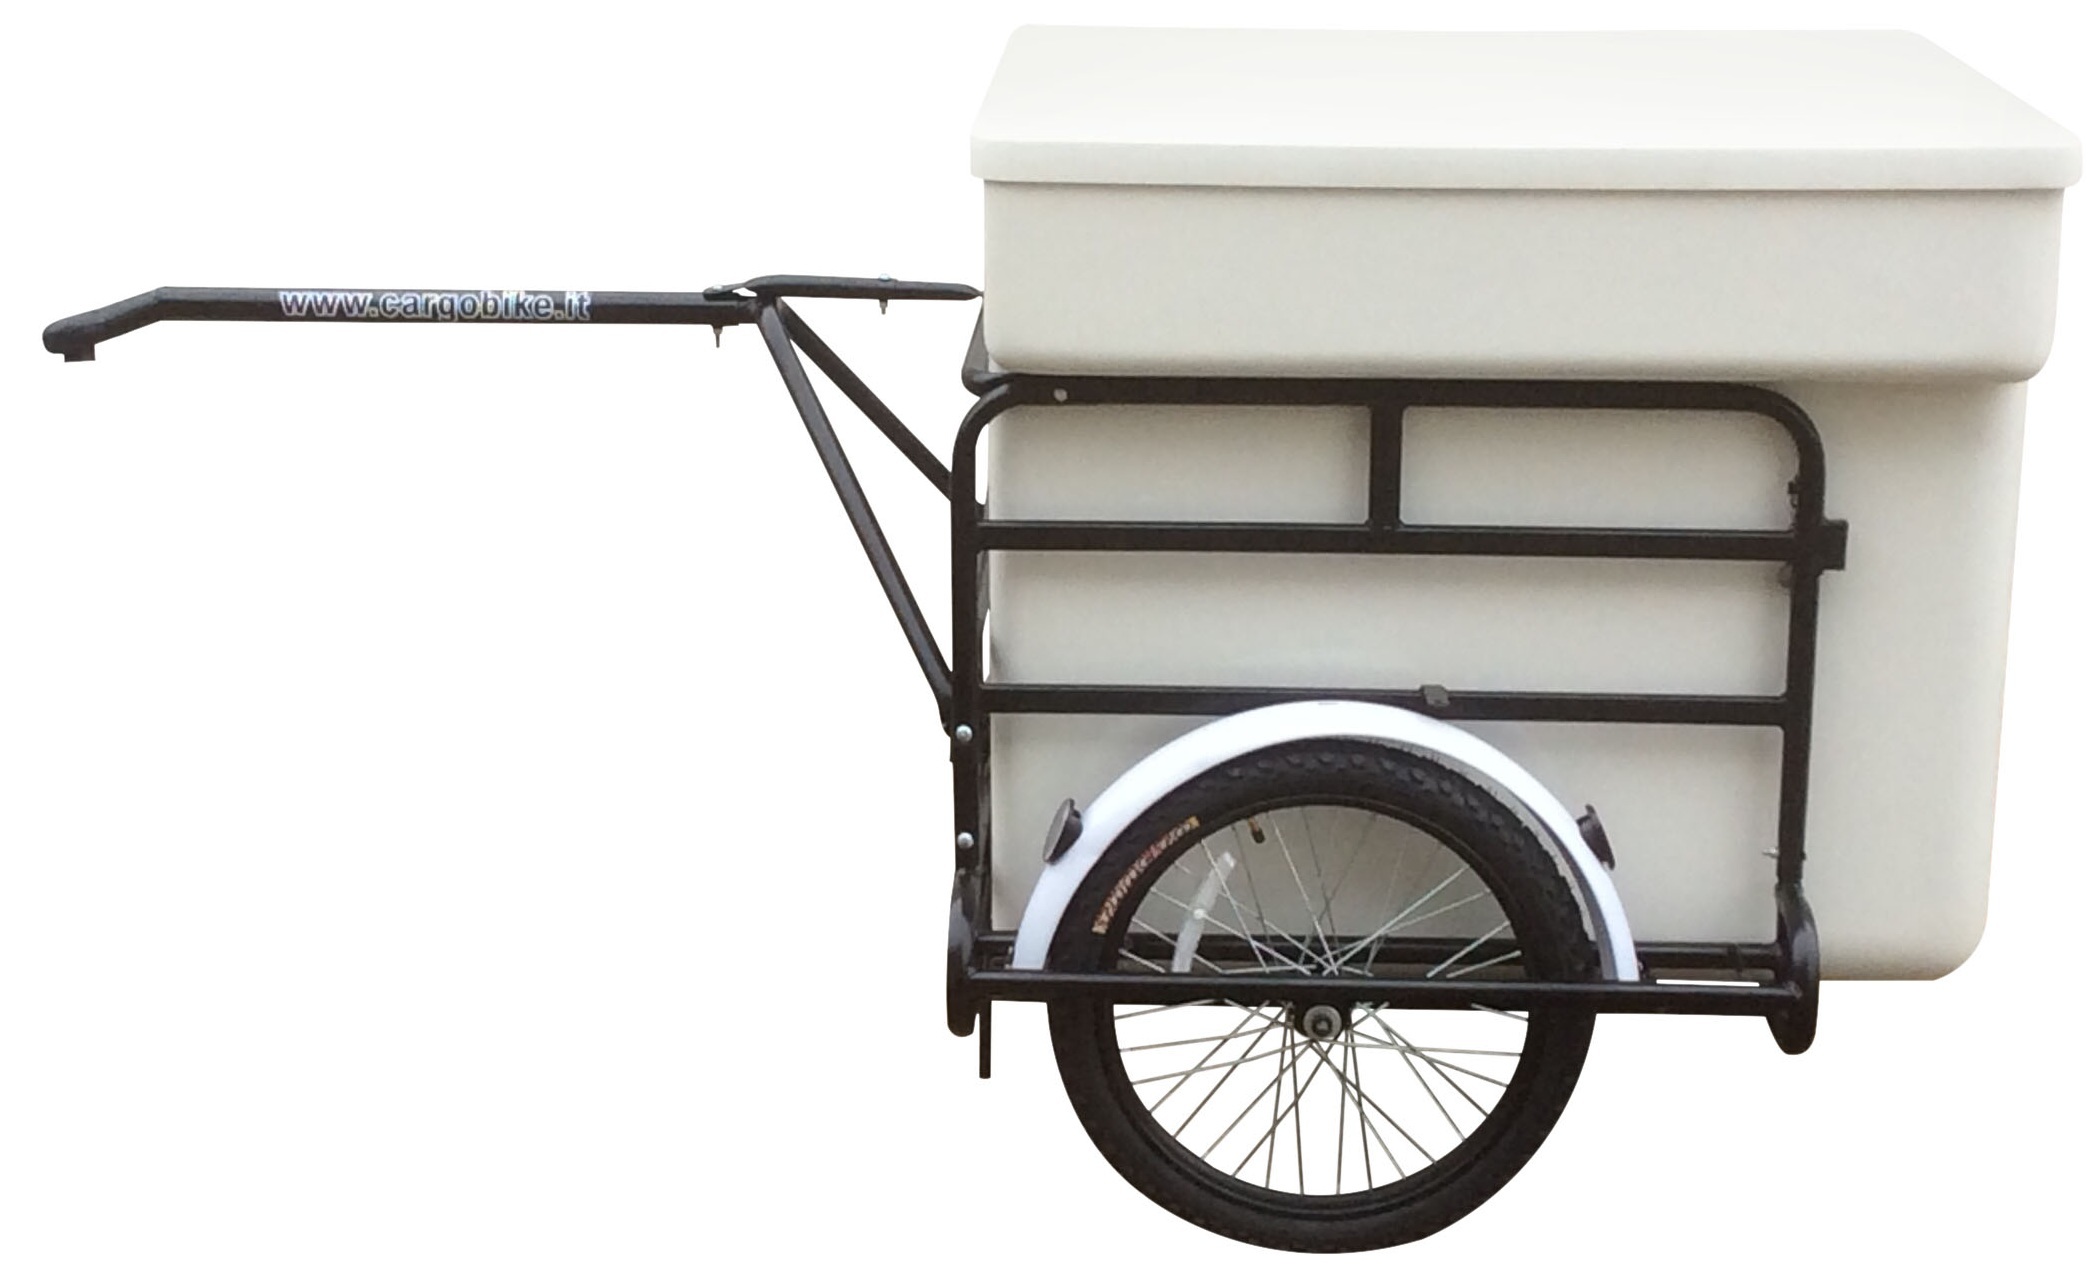 WAGON_TRAILER_FOR_BICYCLE_FOR_STREET_FOOD_CATERING_10